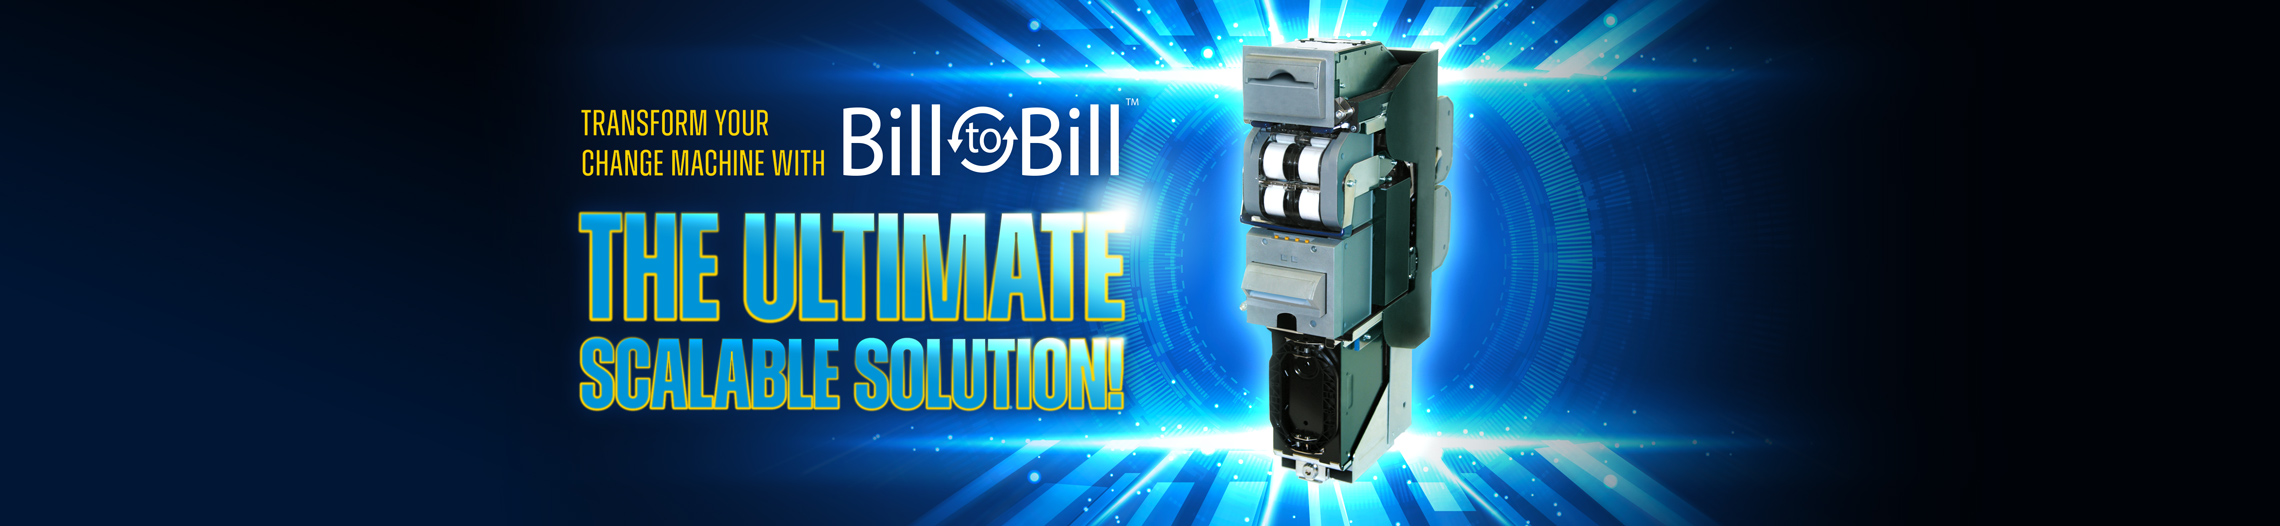 Bill-to-Bill - The Ultimate Scalable Solution!